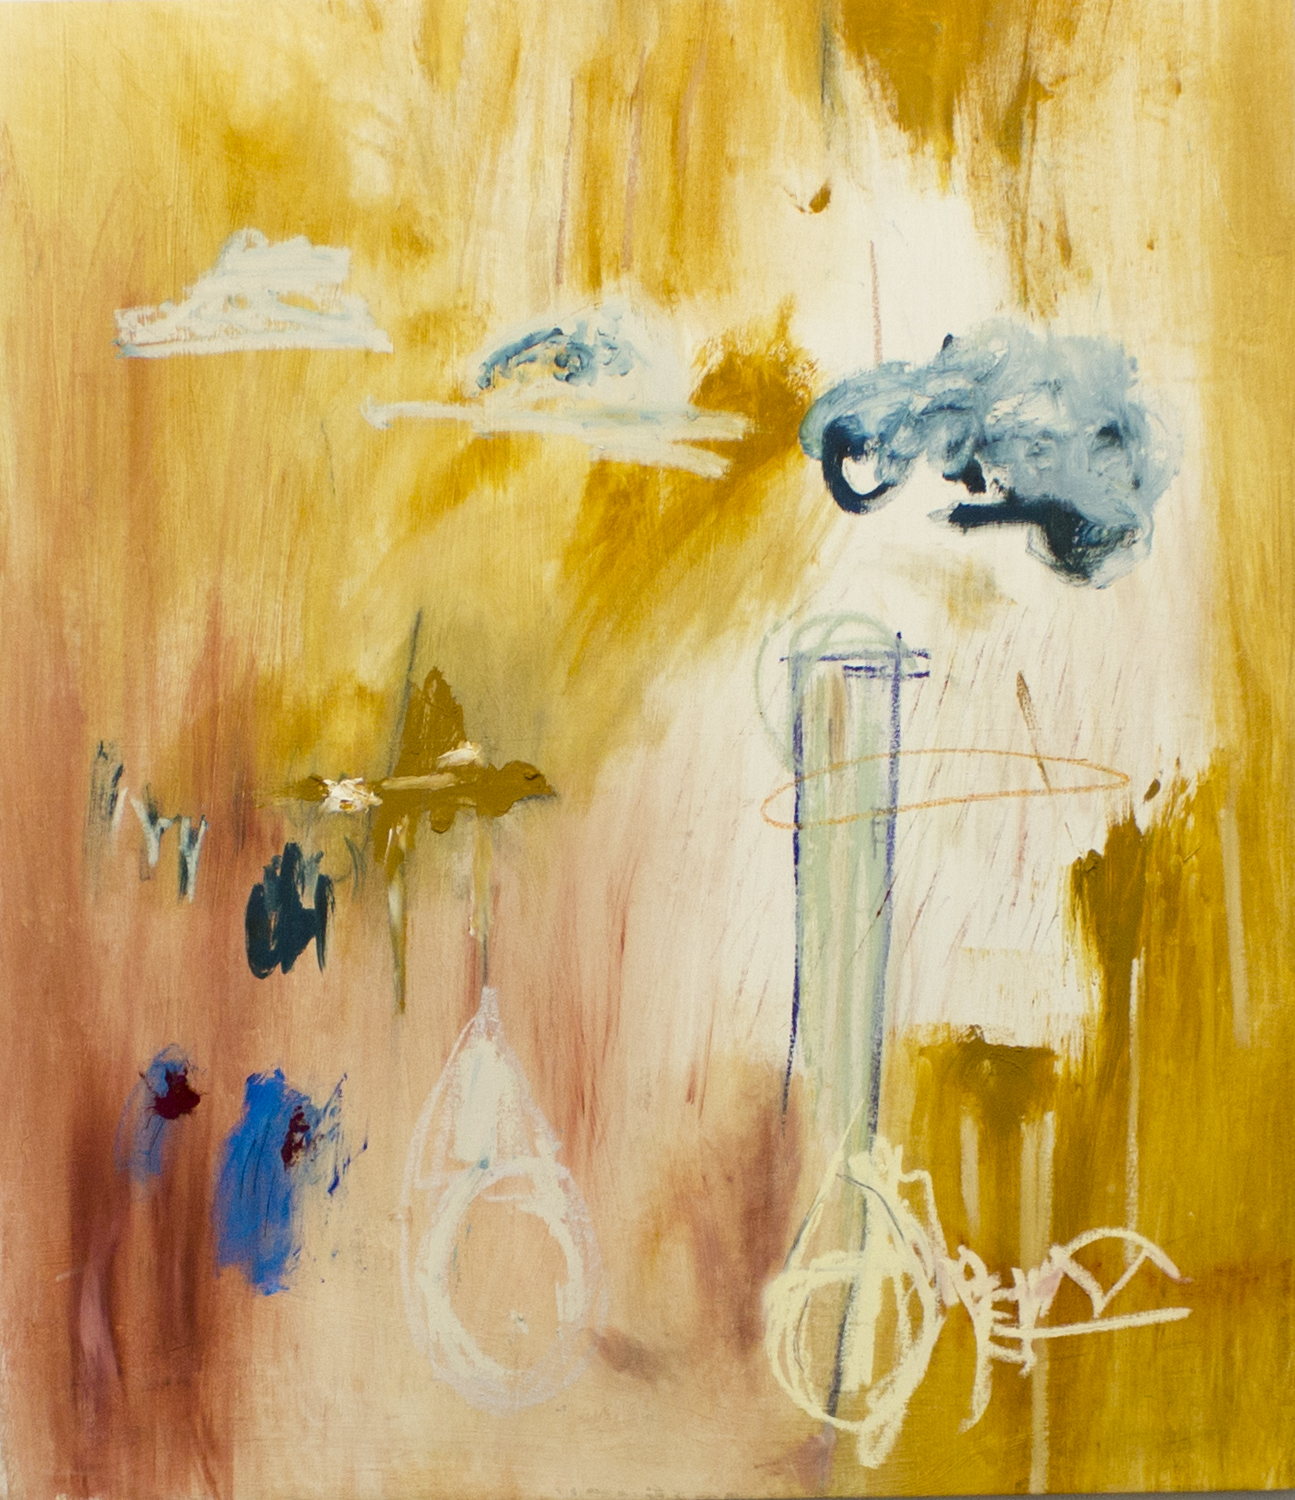   Transitions to Uncertainty (in Three) , 2016  52 x 46 Inches  Oil, Acrylic, Graphite, Charcoal, Colored Pencil, Oil Stick, and Oil Pastel on Canvas  Private Collection 